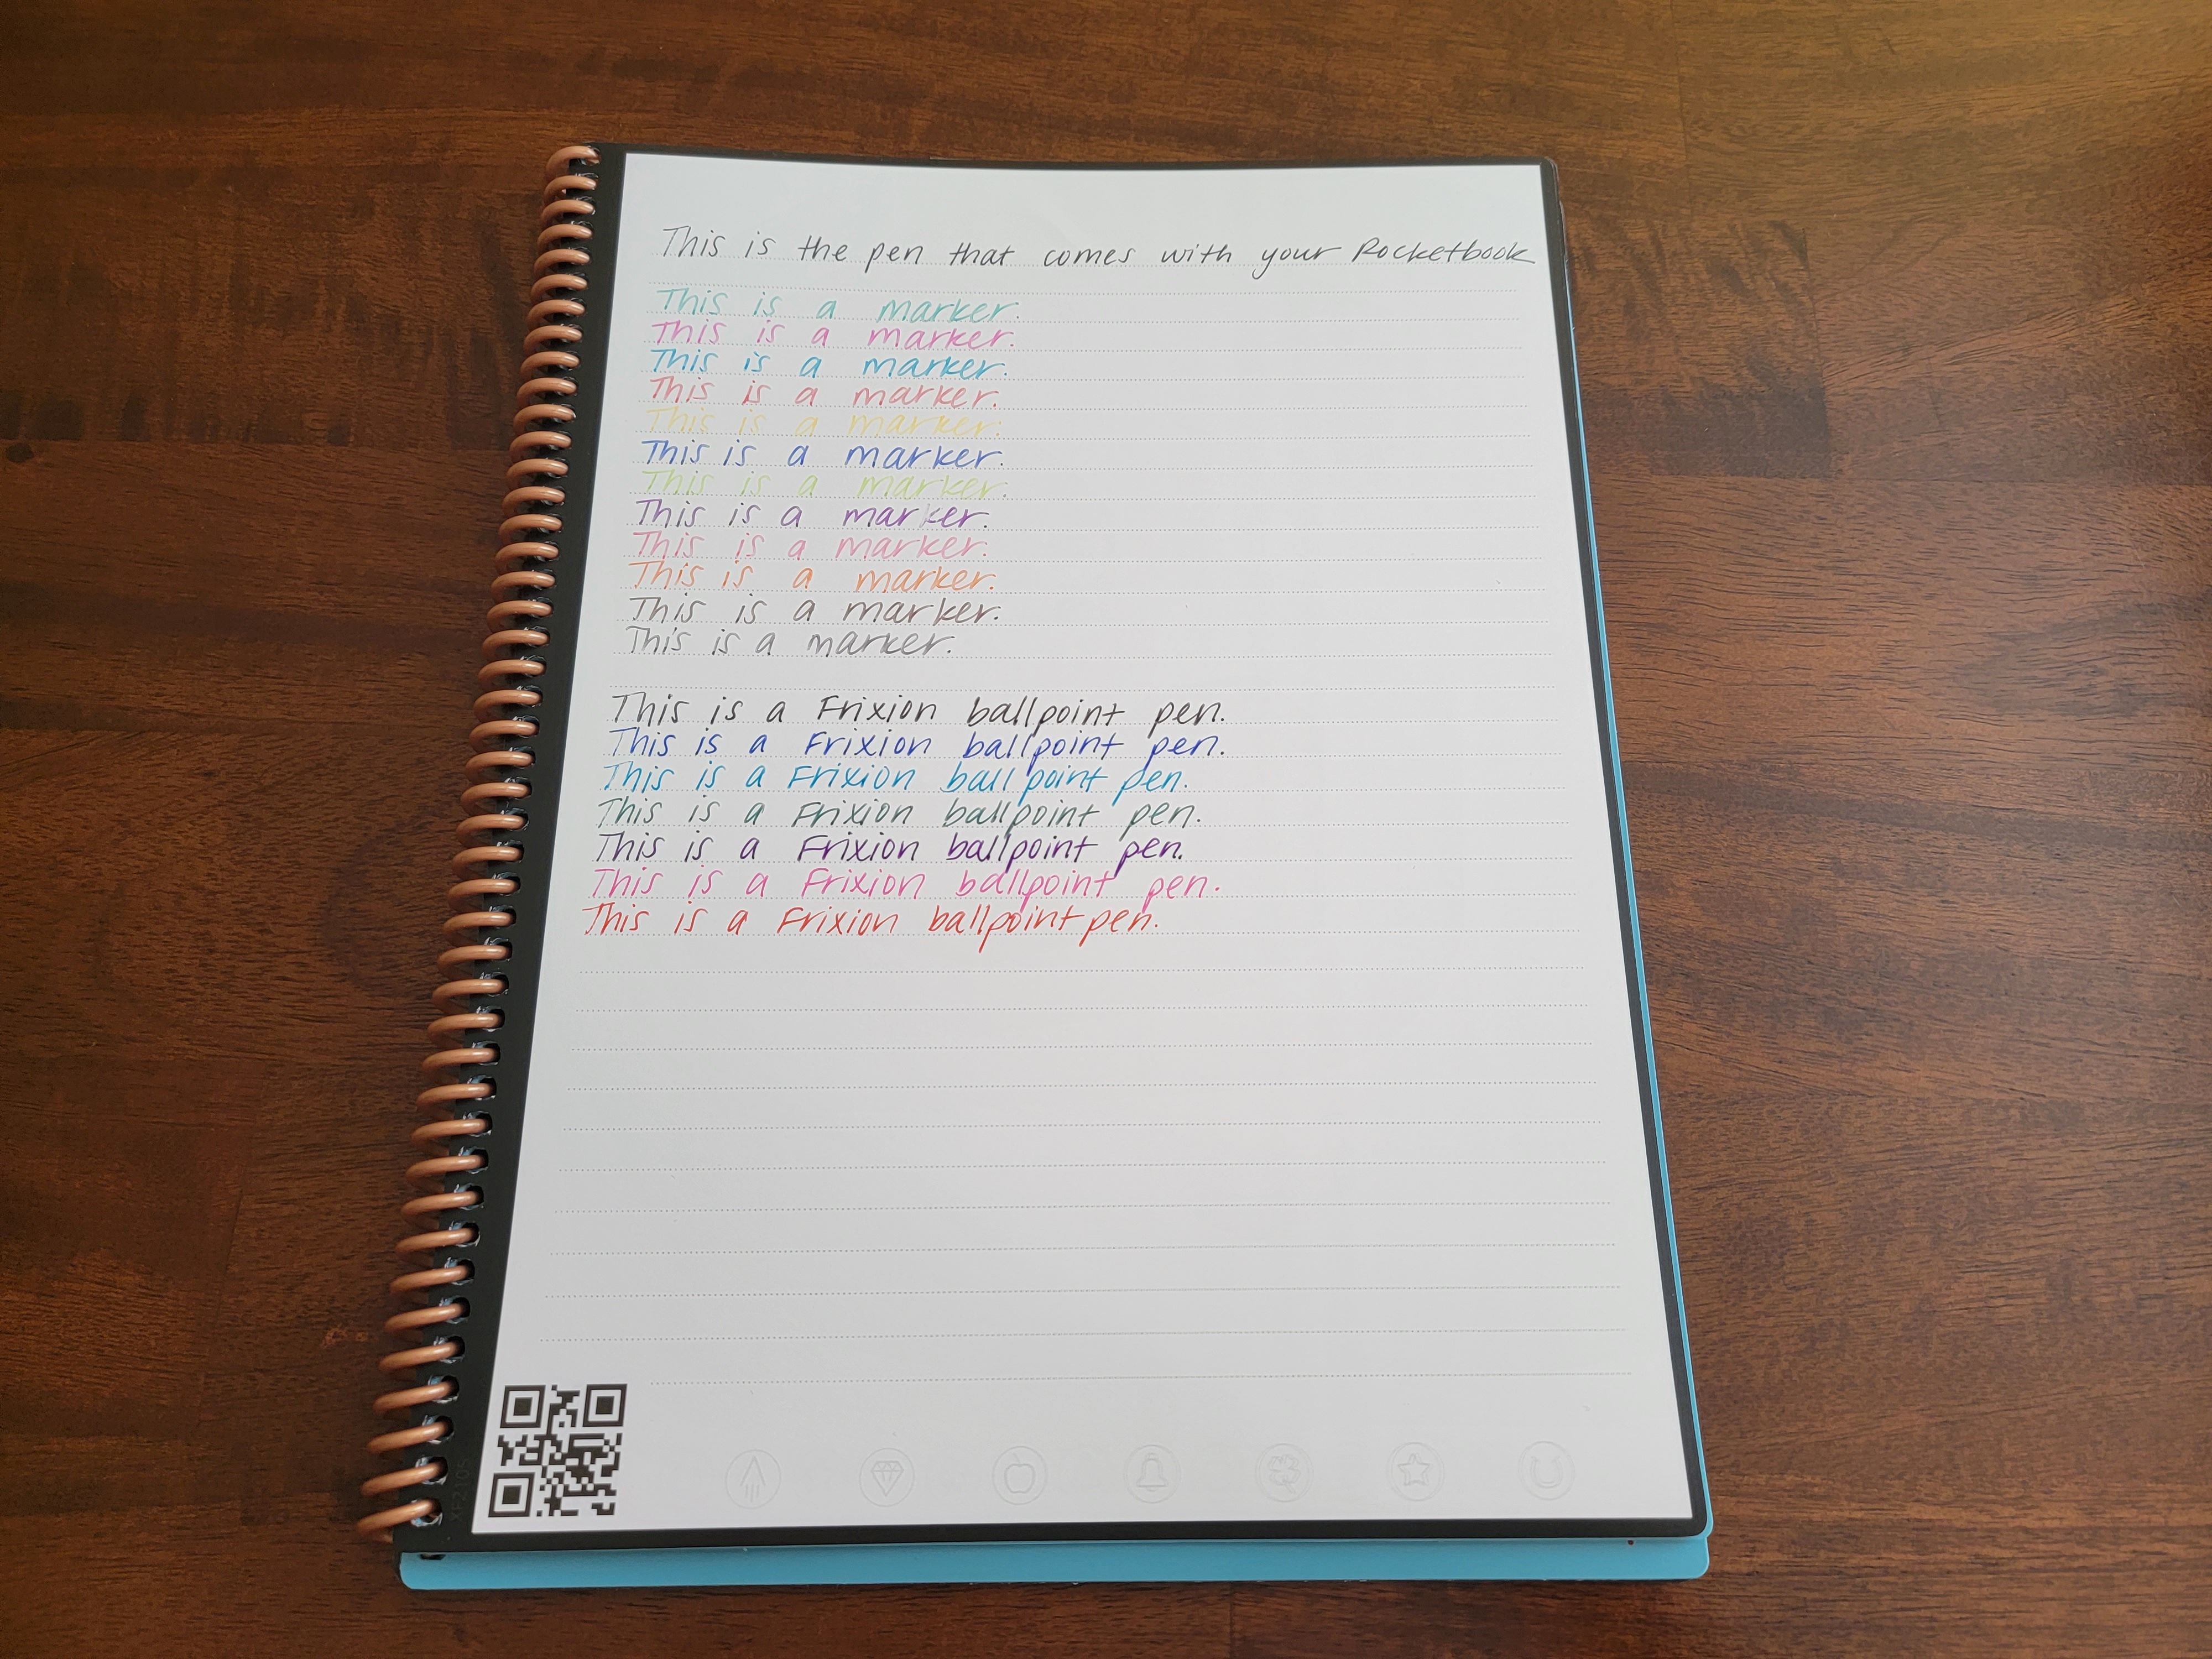 A rocketbook fusion smart notebook is showing what different pens and markers look like by writing the same sentence over and over again.